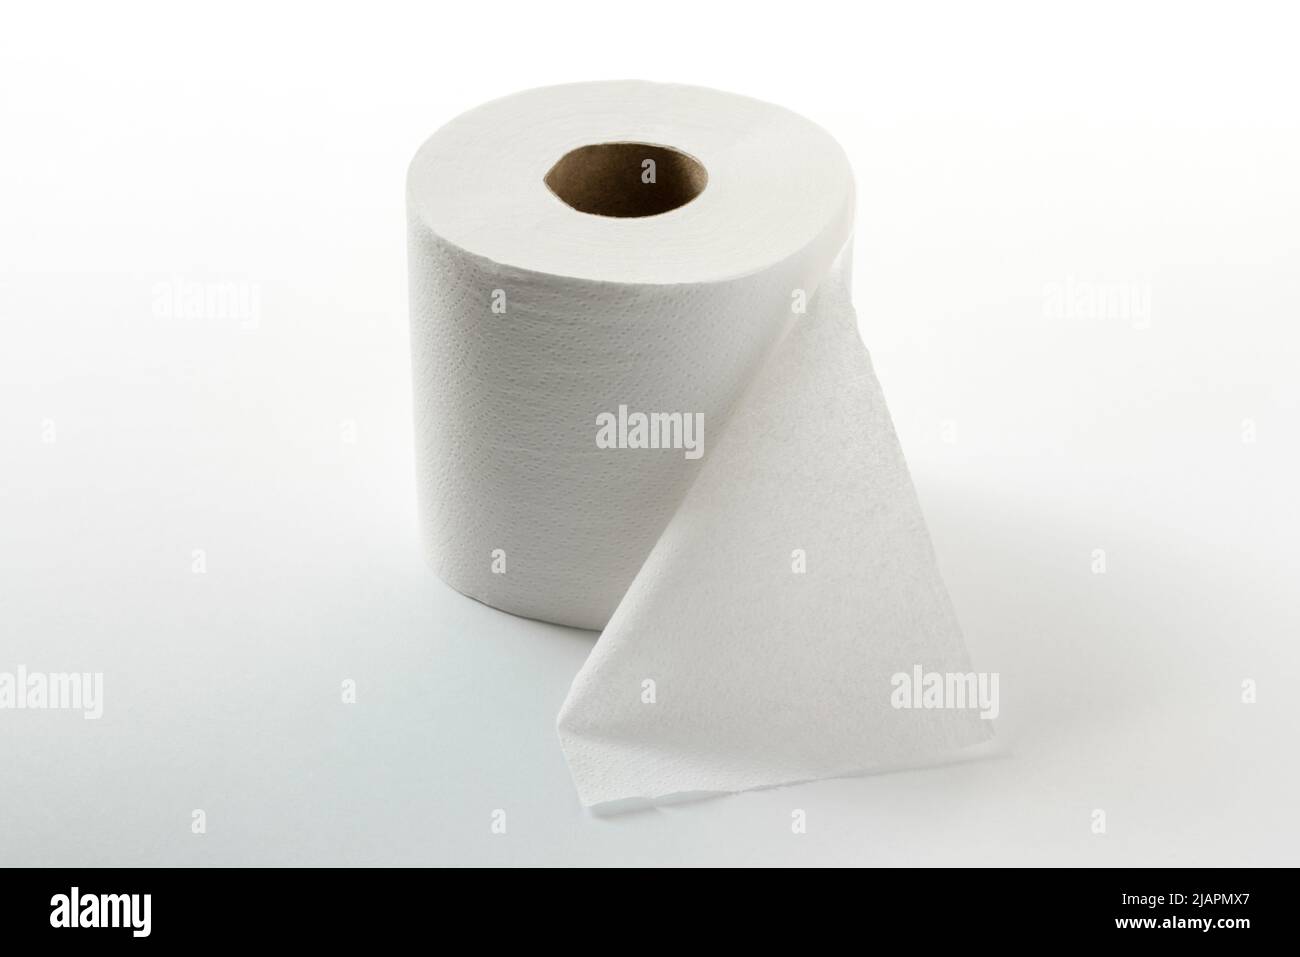 A Roll of Toiletpaper Stock Photo